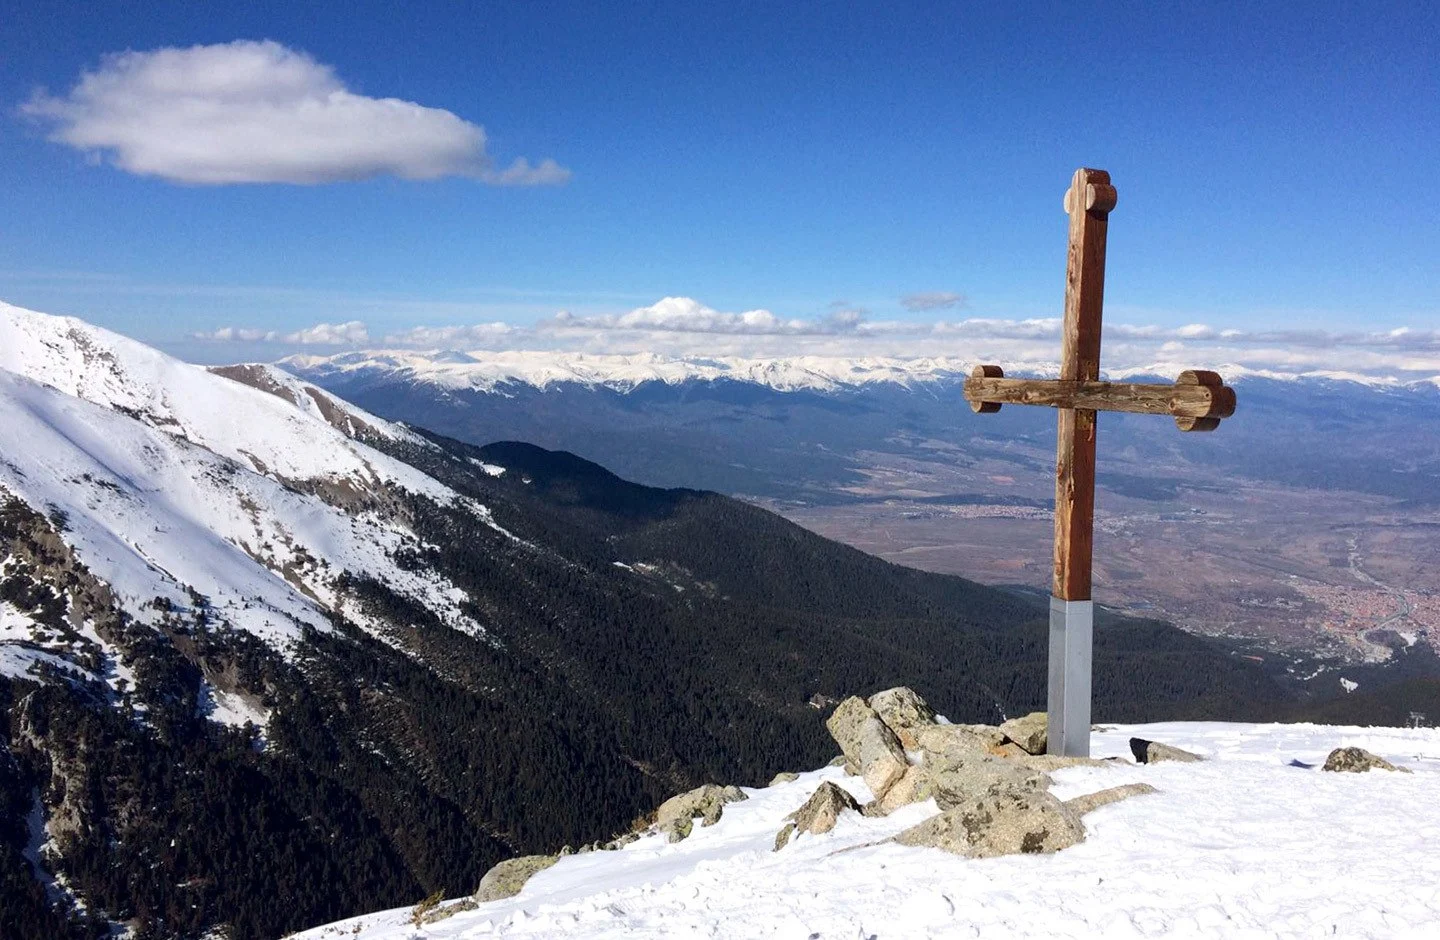 Views across Bansko in winter from the mountaintop